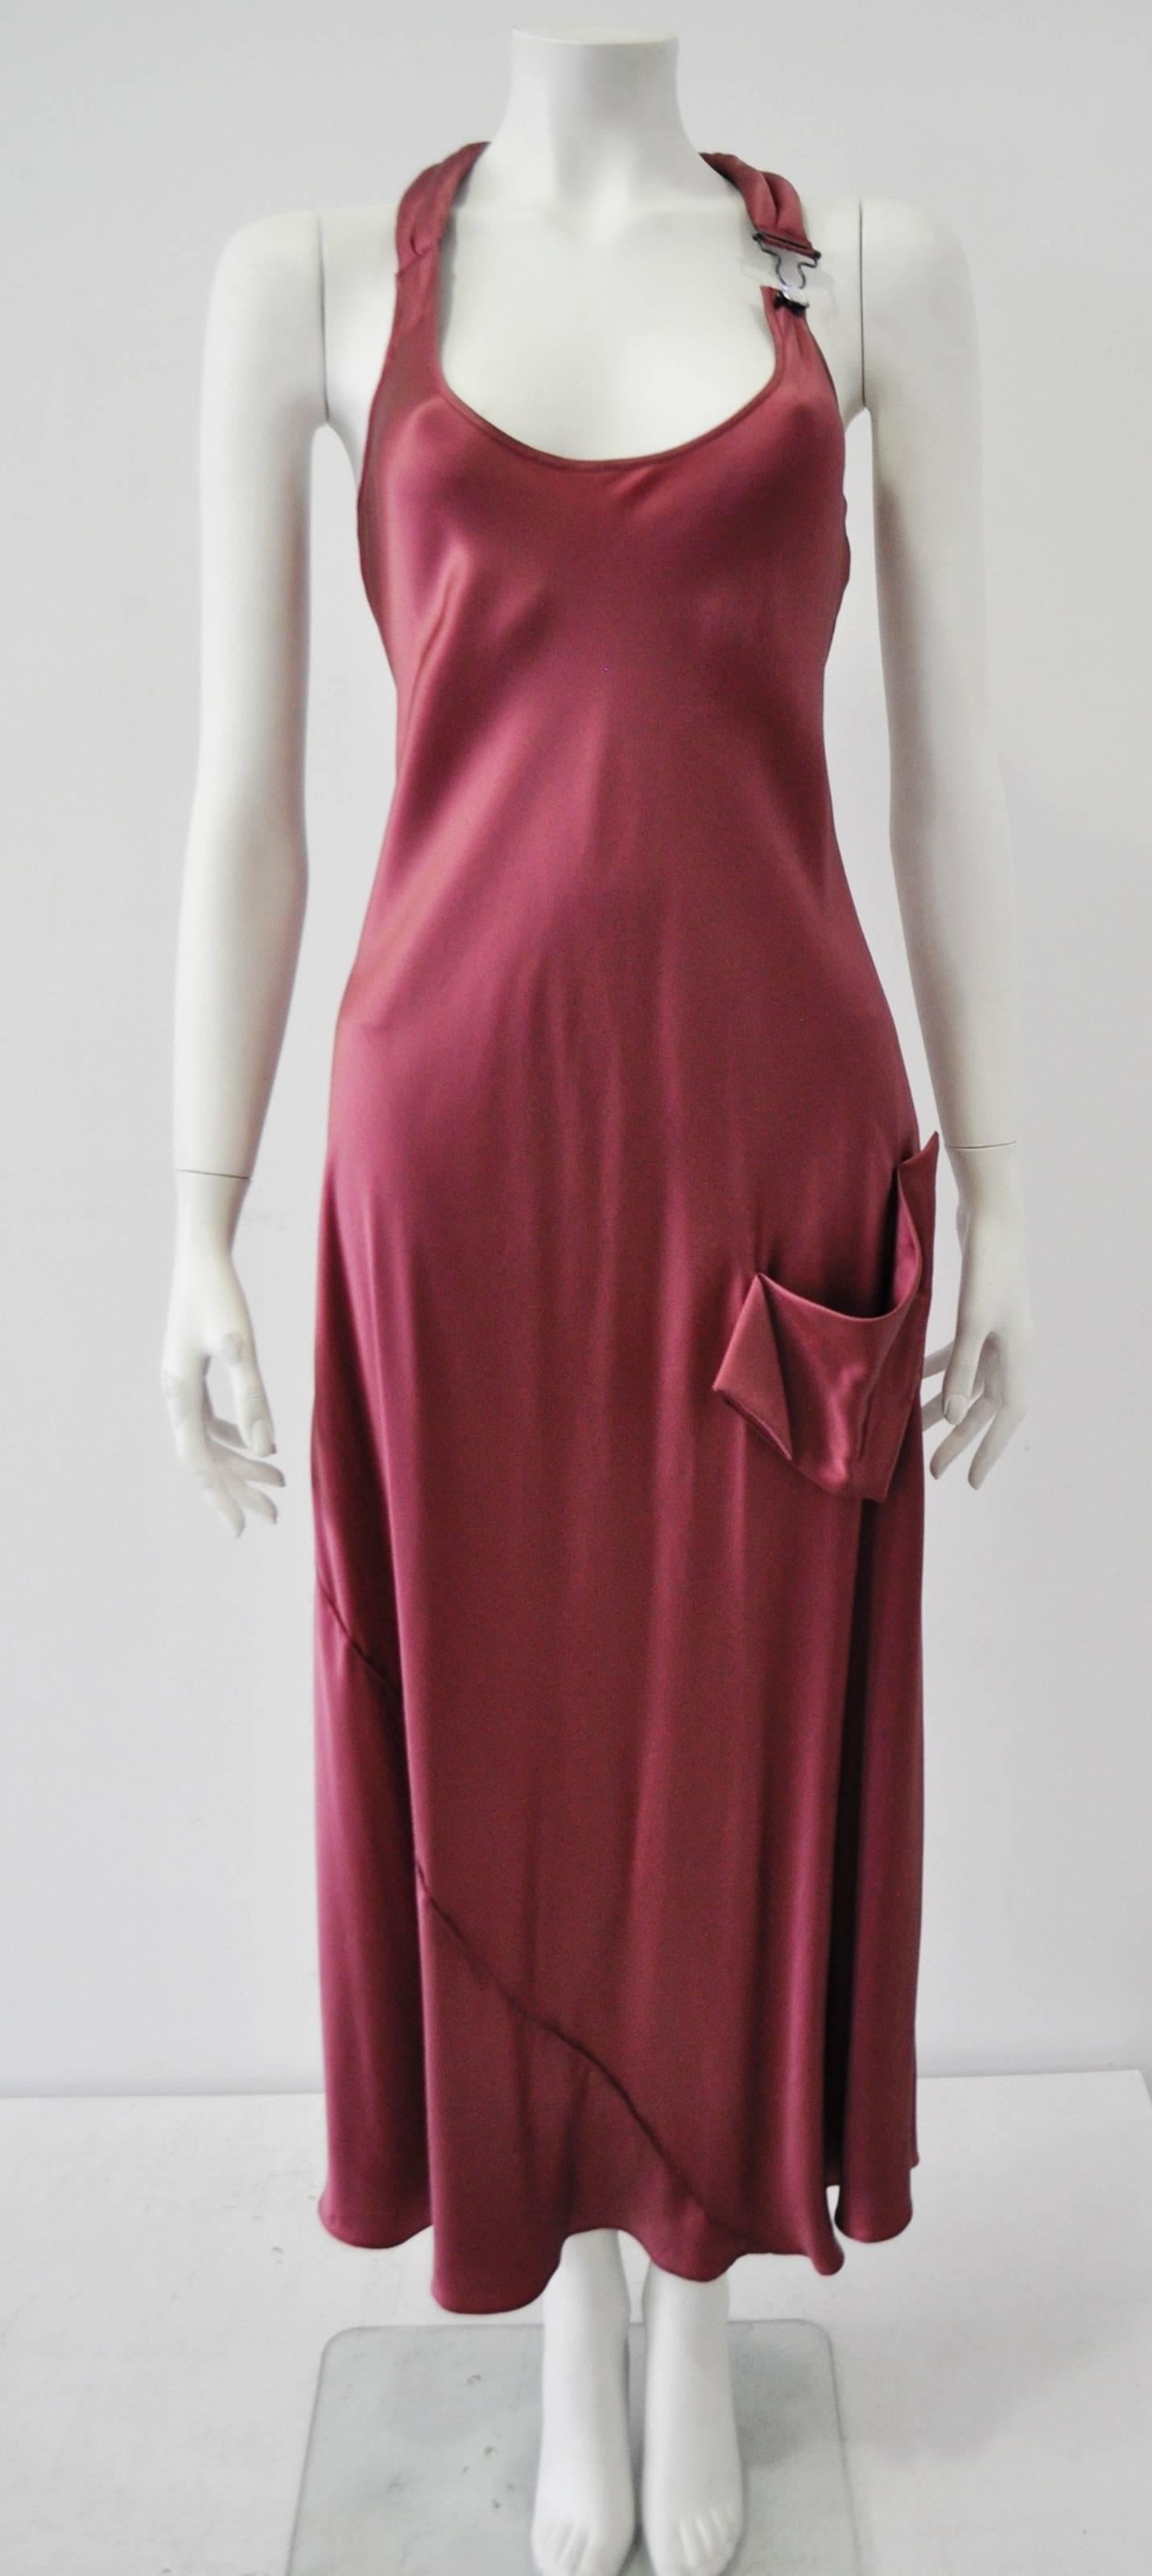 One of a Kind Sonia Rykiel Raspberry Silk Long Dress Featuring Overall Clasp and Crystal Button